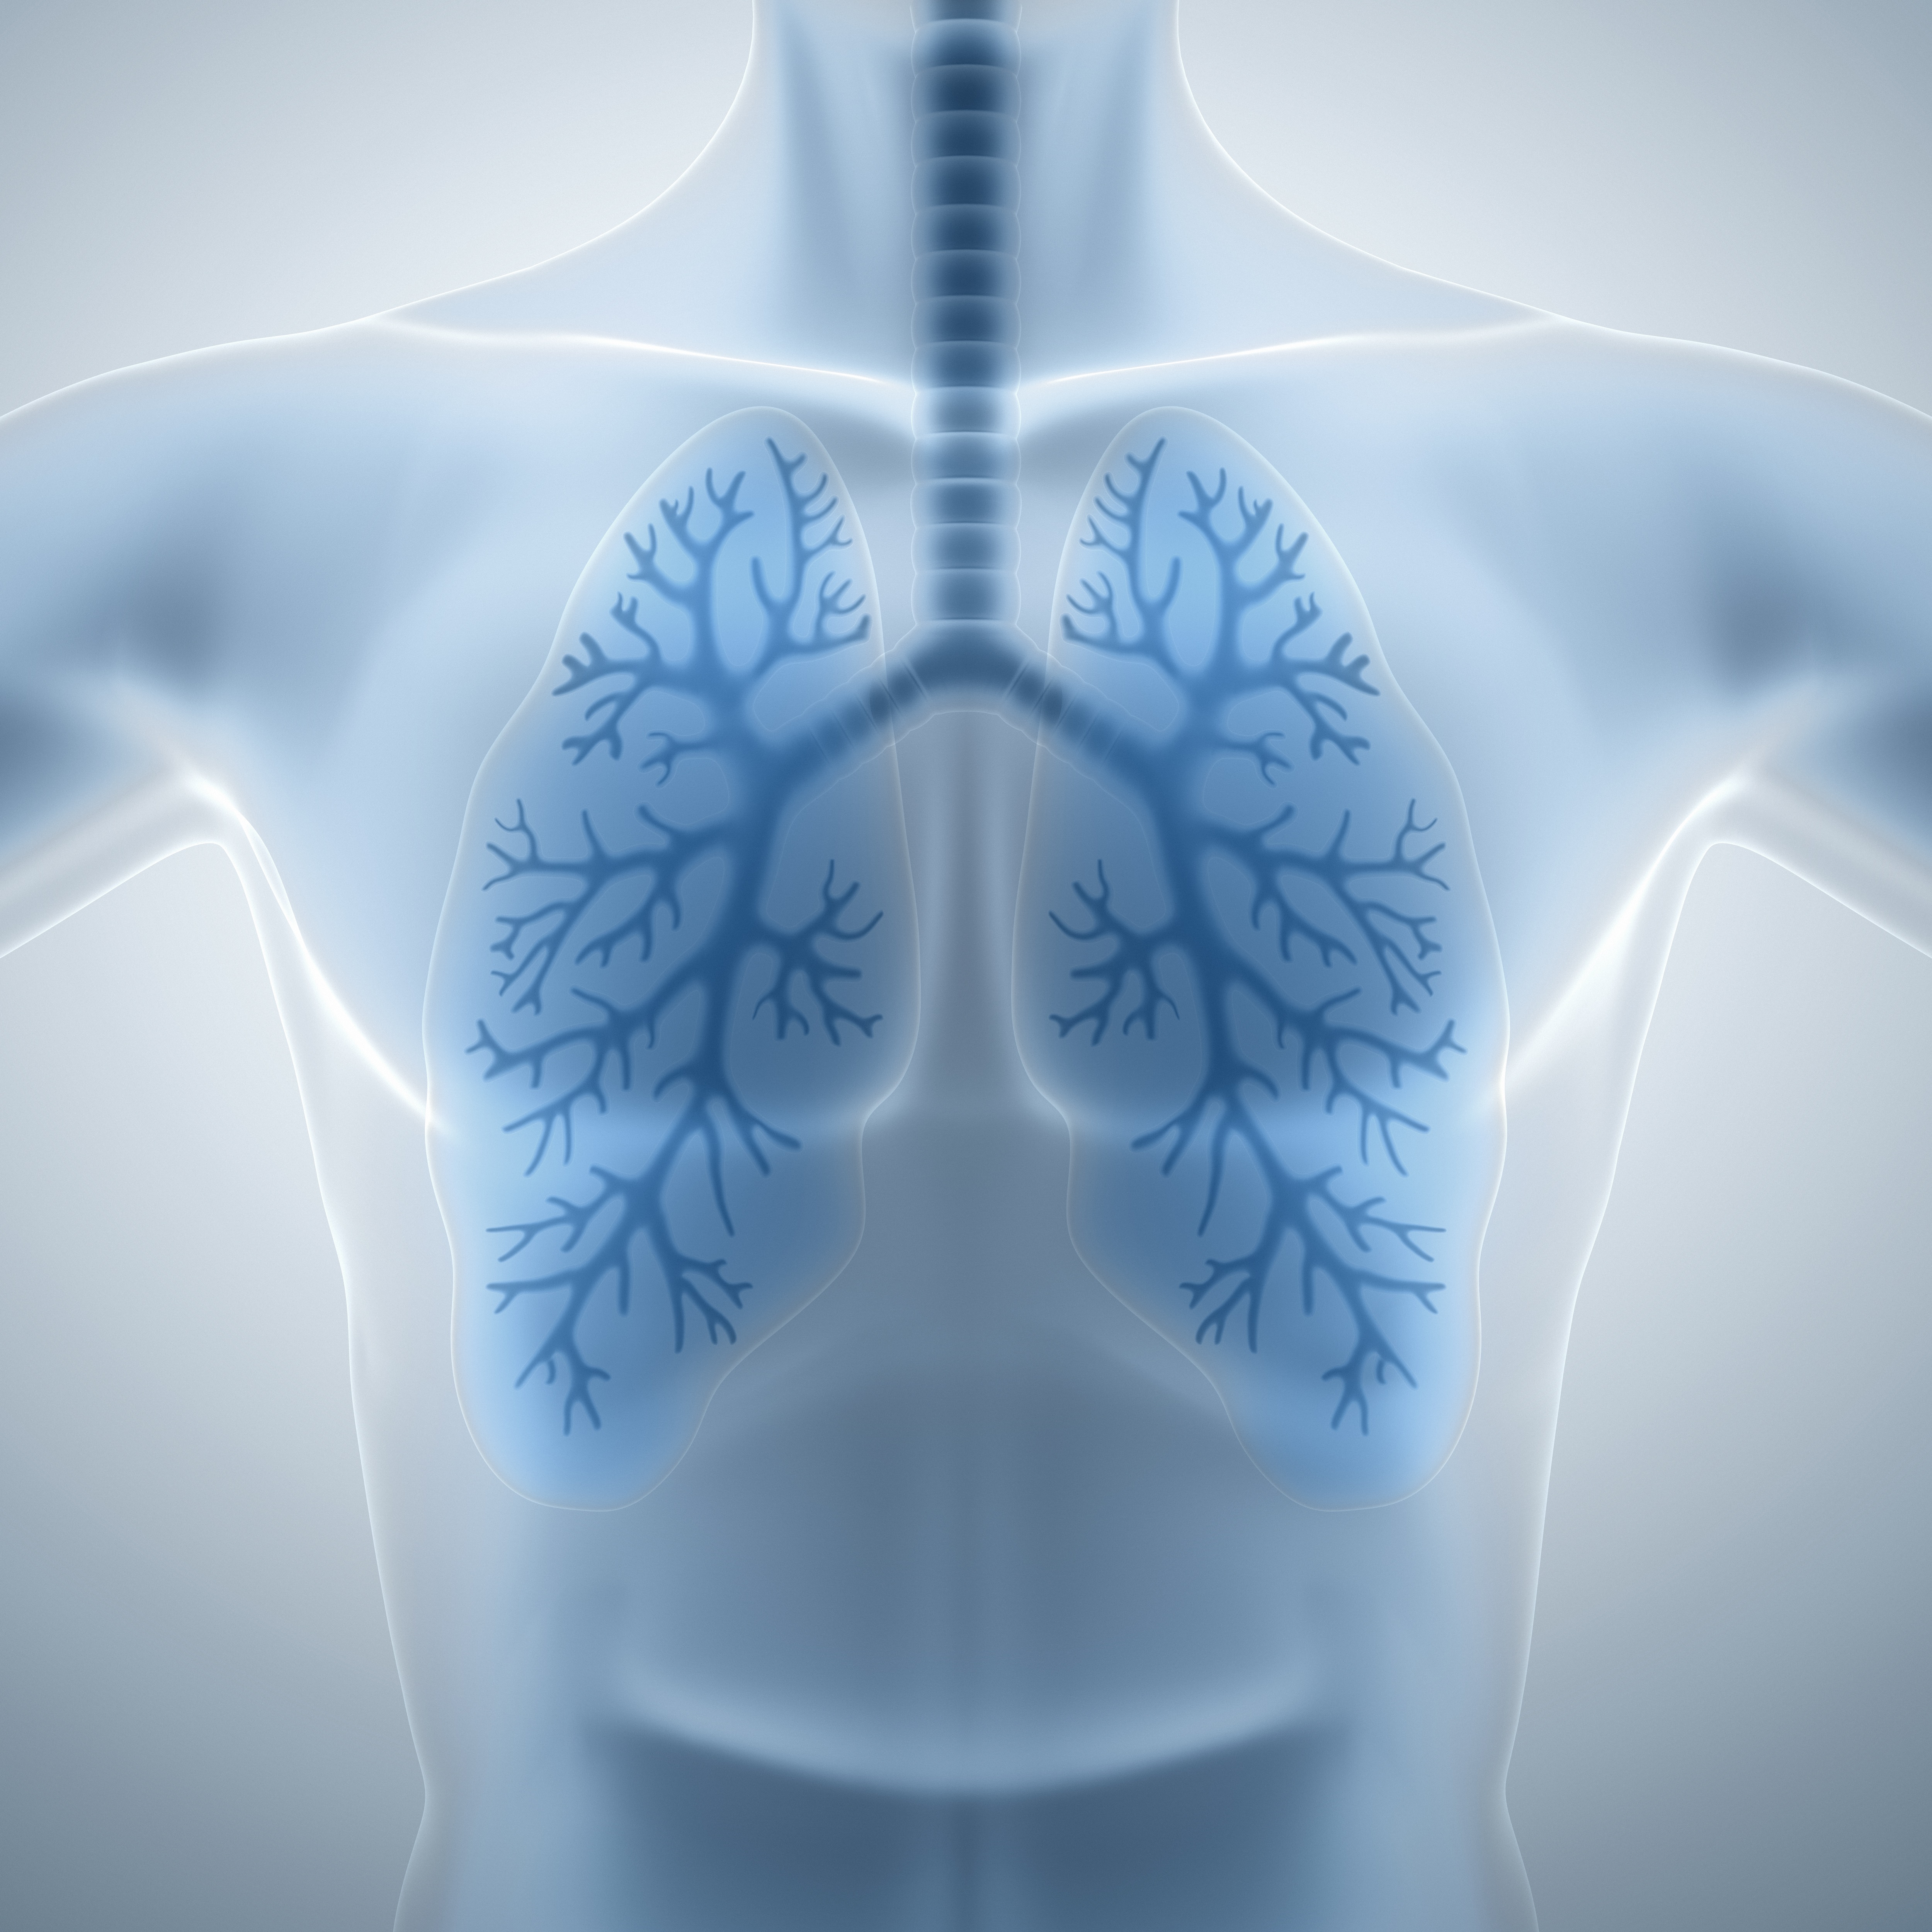 Boehringer’s Drug Combination Therapy For COPD Promotes Lung Function Improvement in Patients